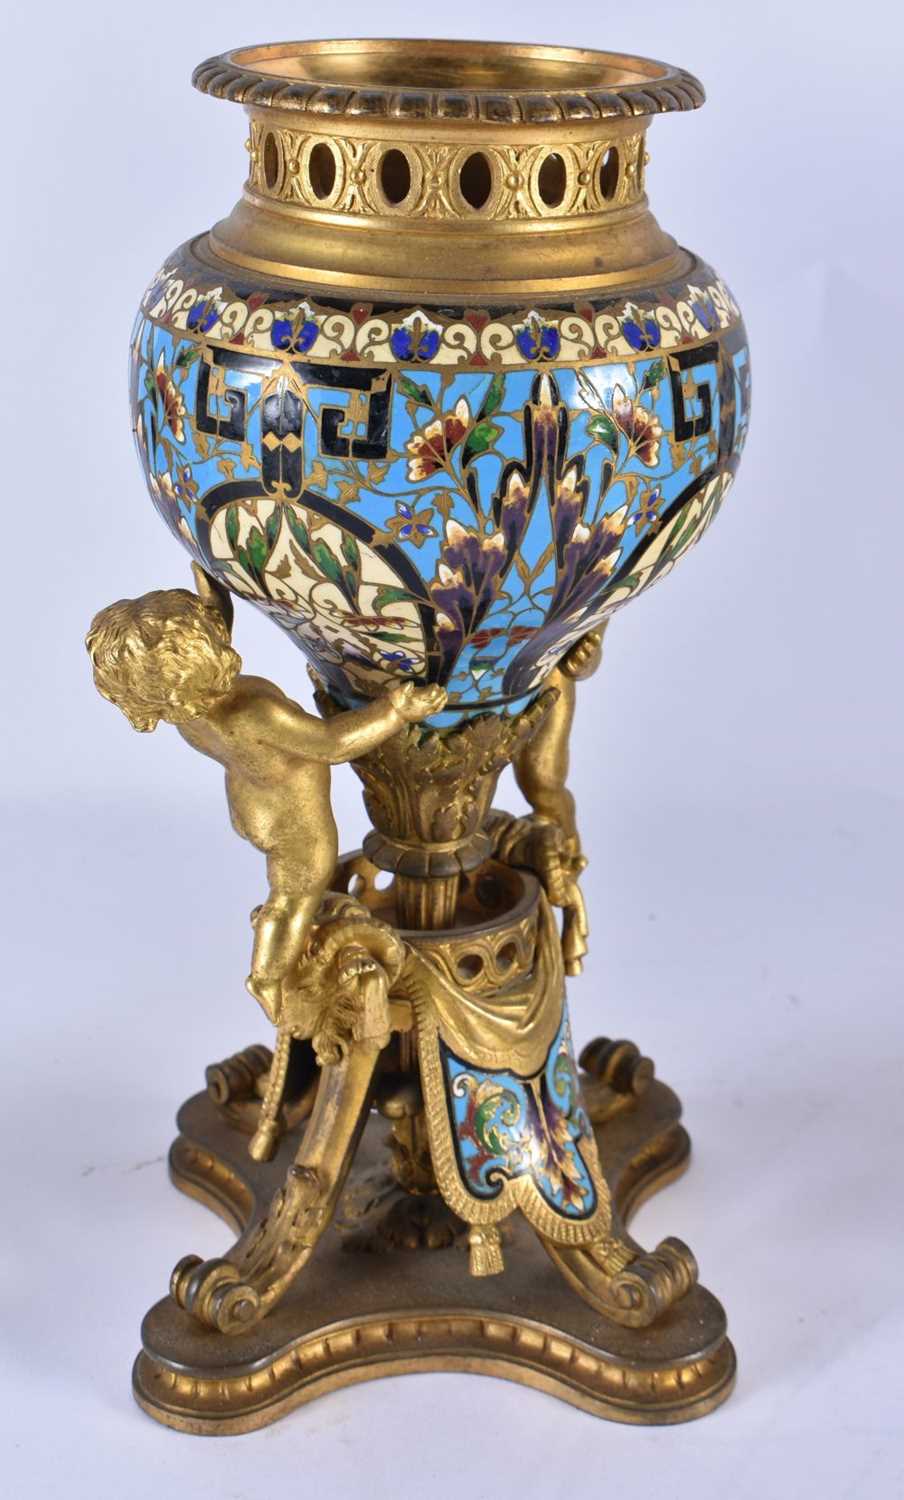 A FINE 19TH CENTURY FRENCH ORMOLU AND CHAMPLEVE ENAMEL CLOCK GARNITURE formed with putti amongst - Image 5 of 9